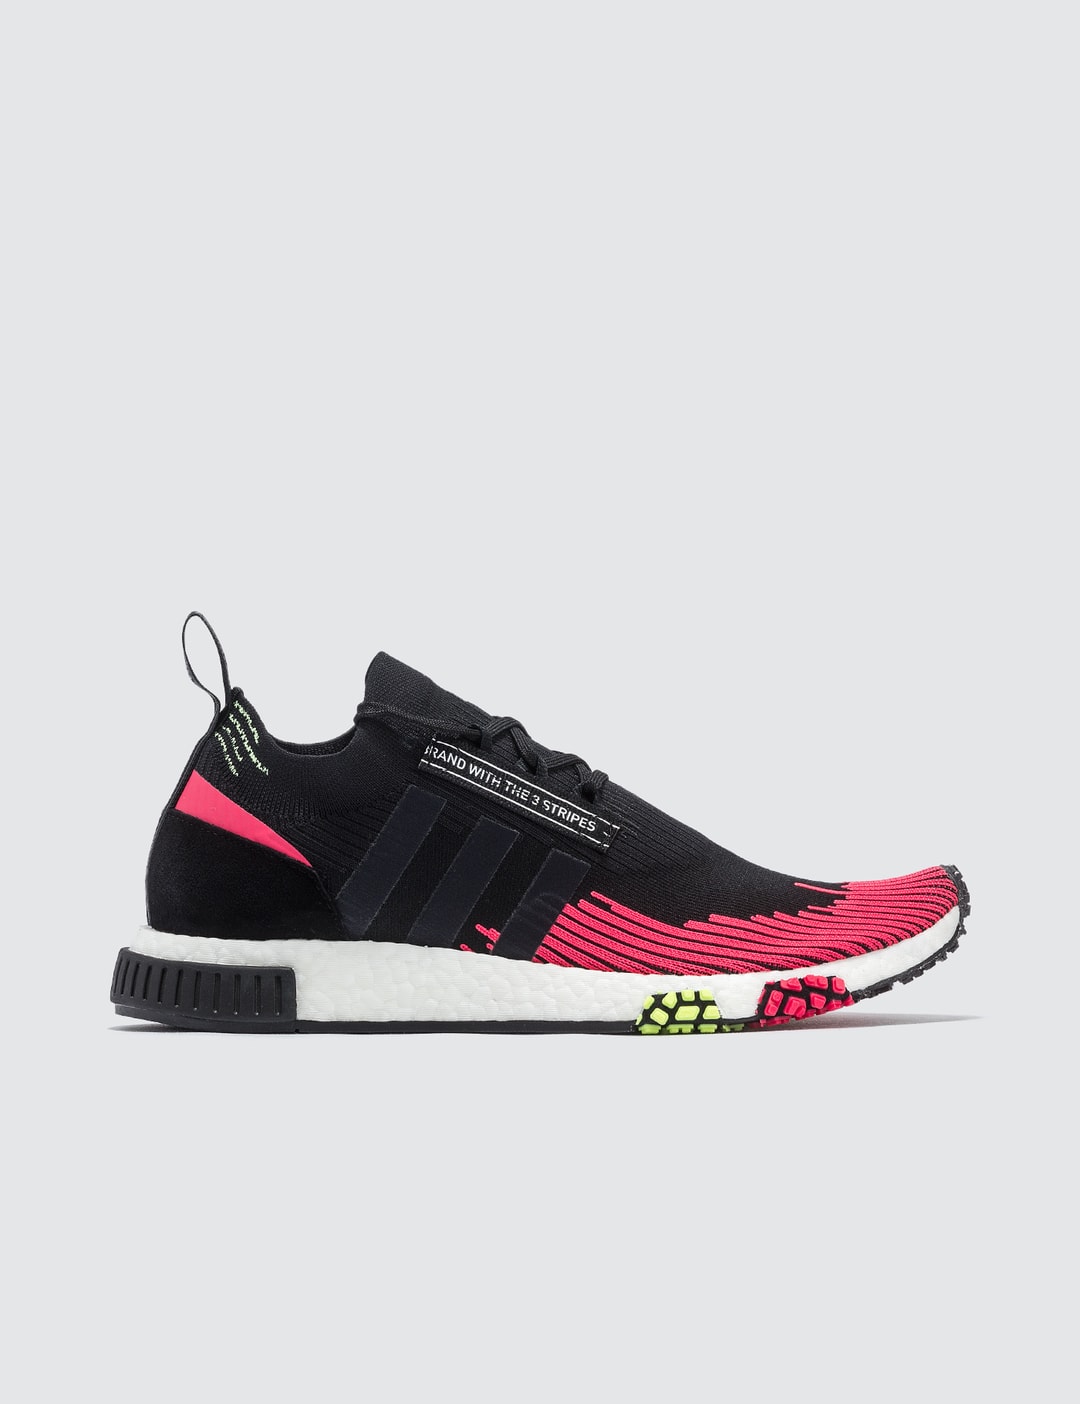 Adidas - NMD Racer Primeknit | HBX - Globally Curated Fashion and Lifestyle by Hypebeast